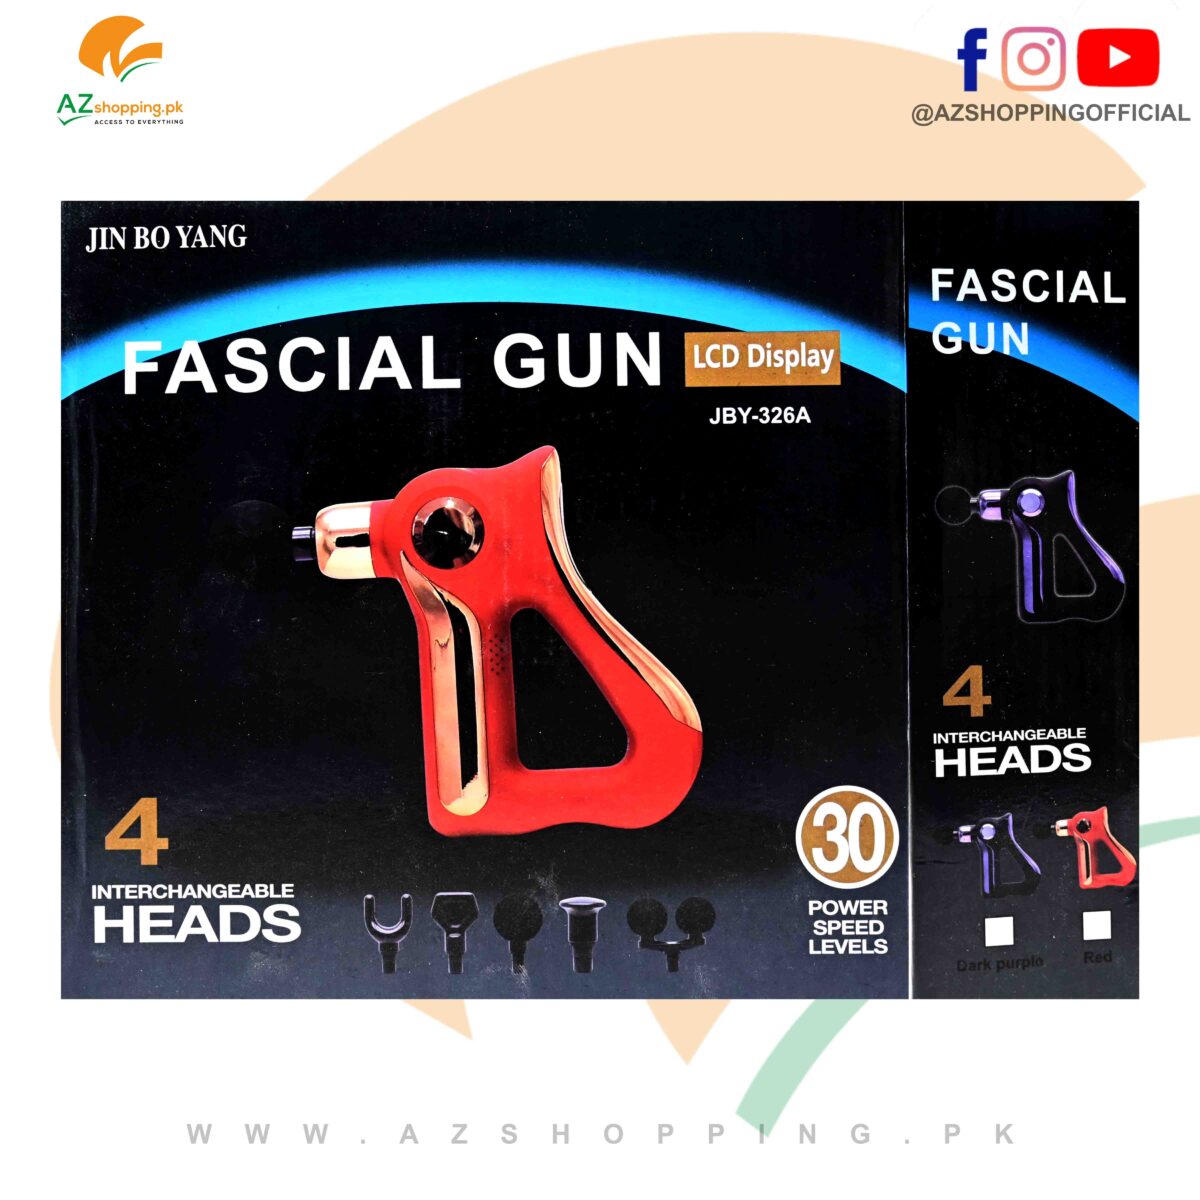 Fascial Gun & Handheld Full Body Muscle Relaxation Massager - 4 Interchangeable Heads with LCD Display – Model: JBY-326A